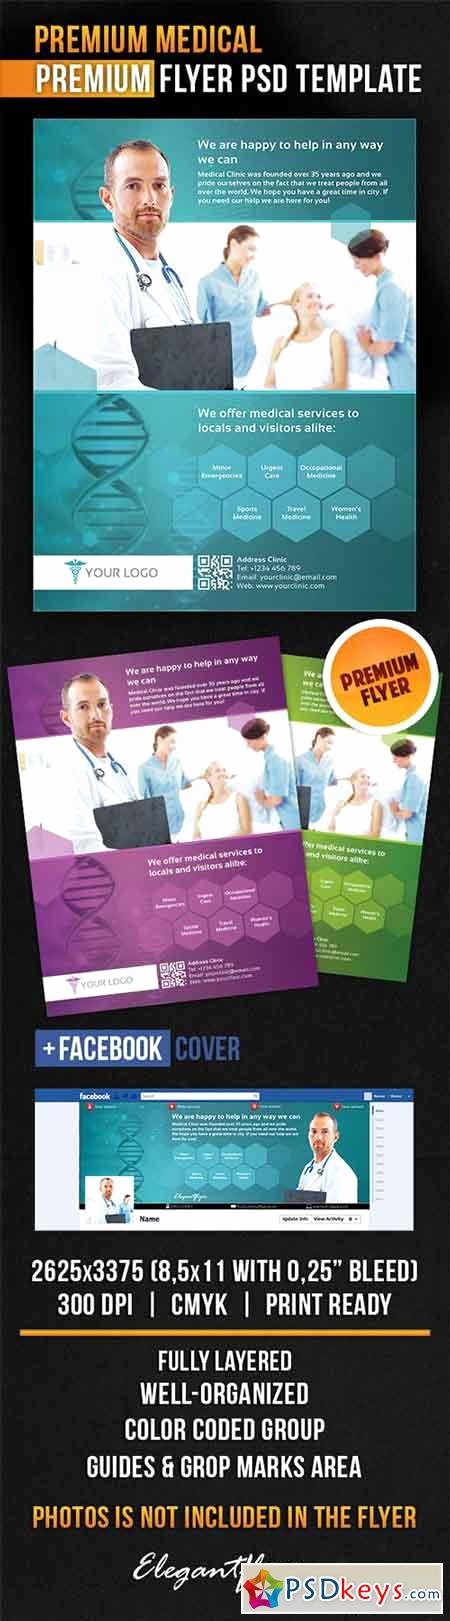 Premium Medical Flyer Psd Template Cover Free